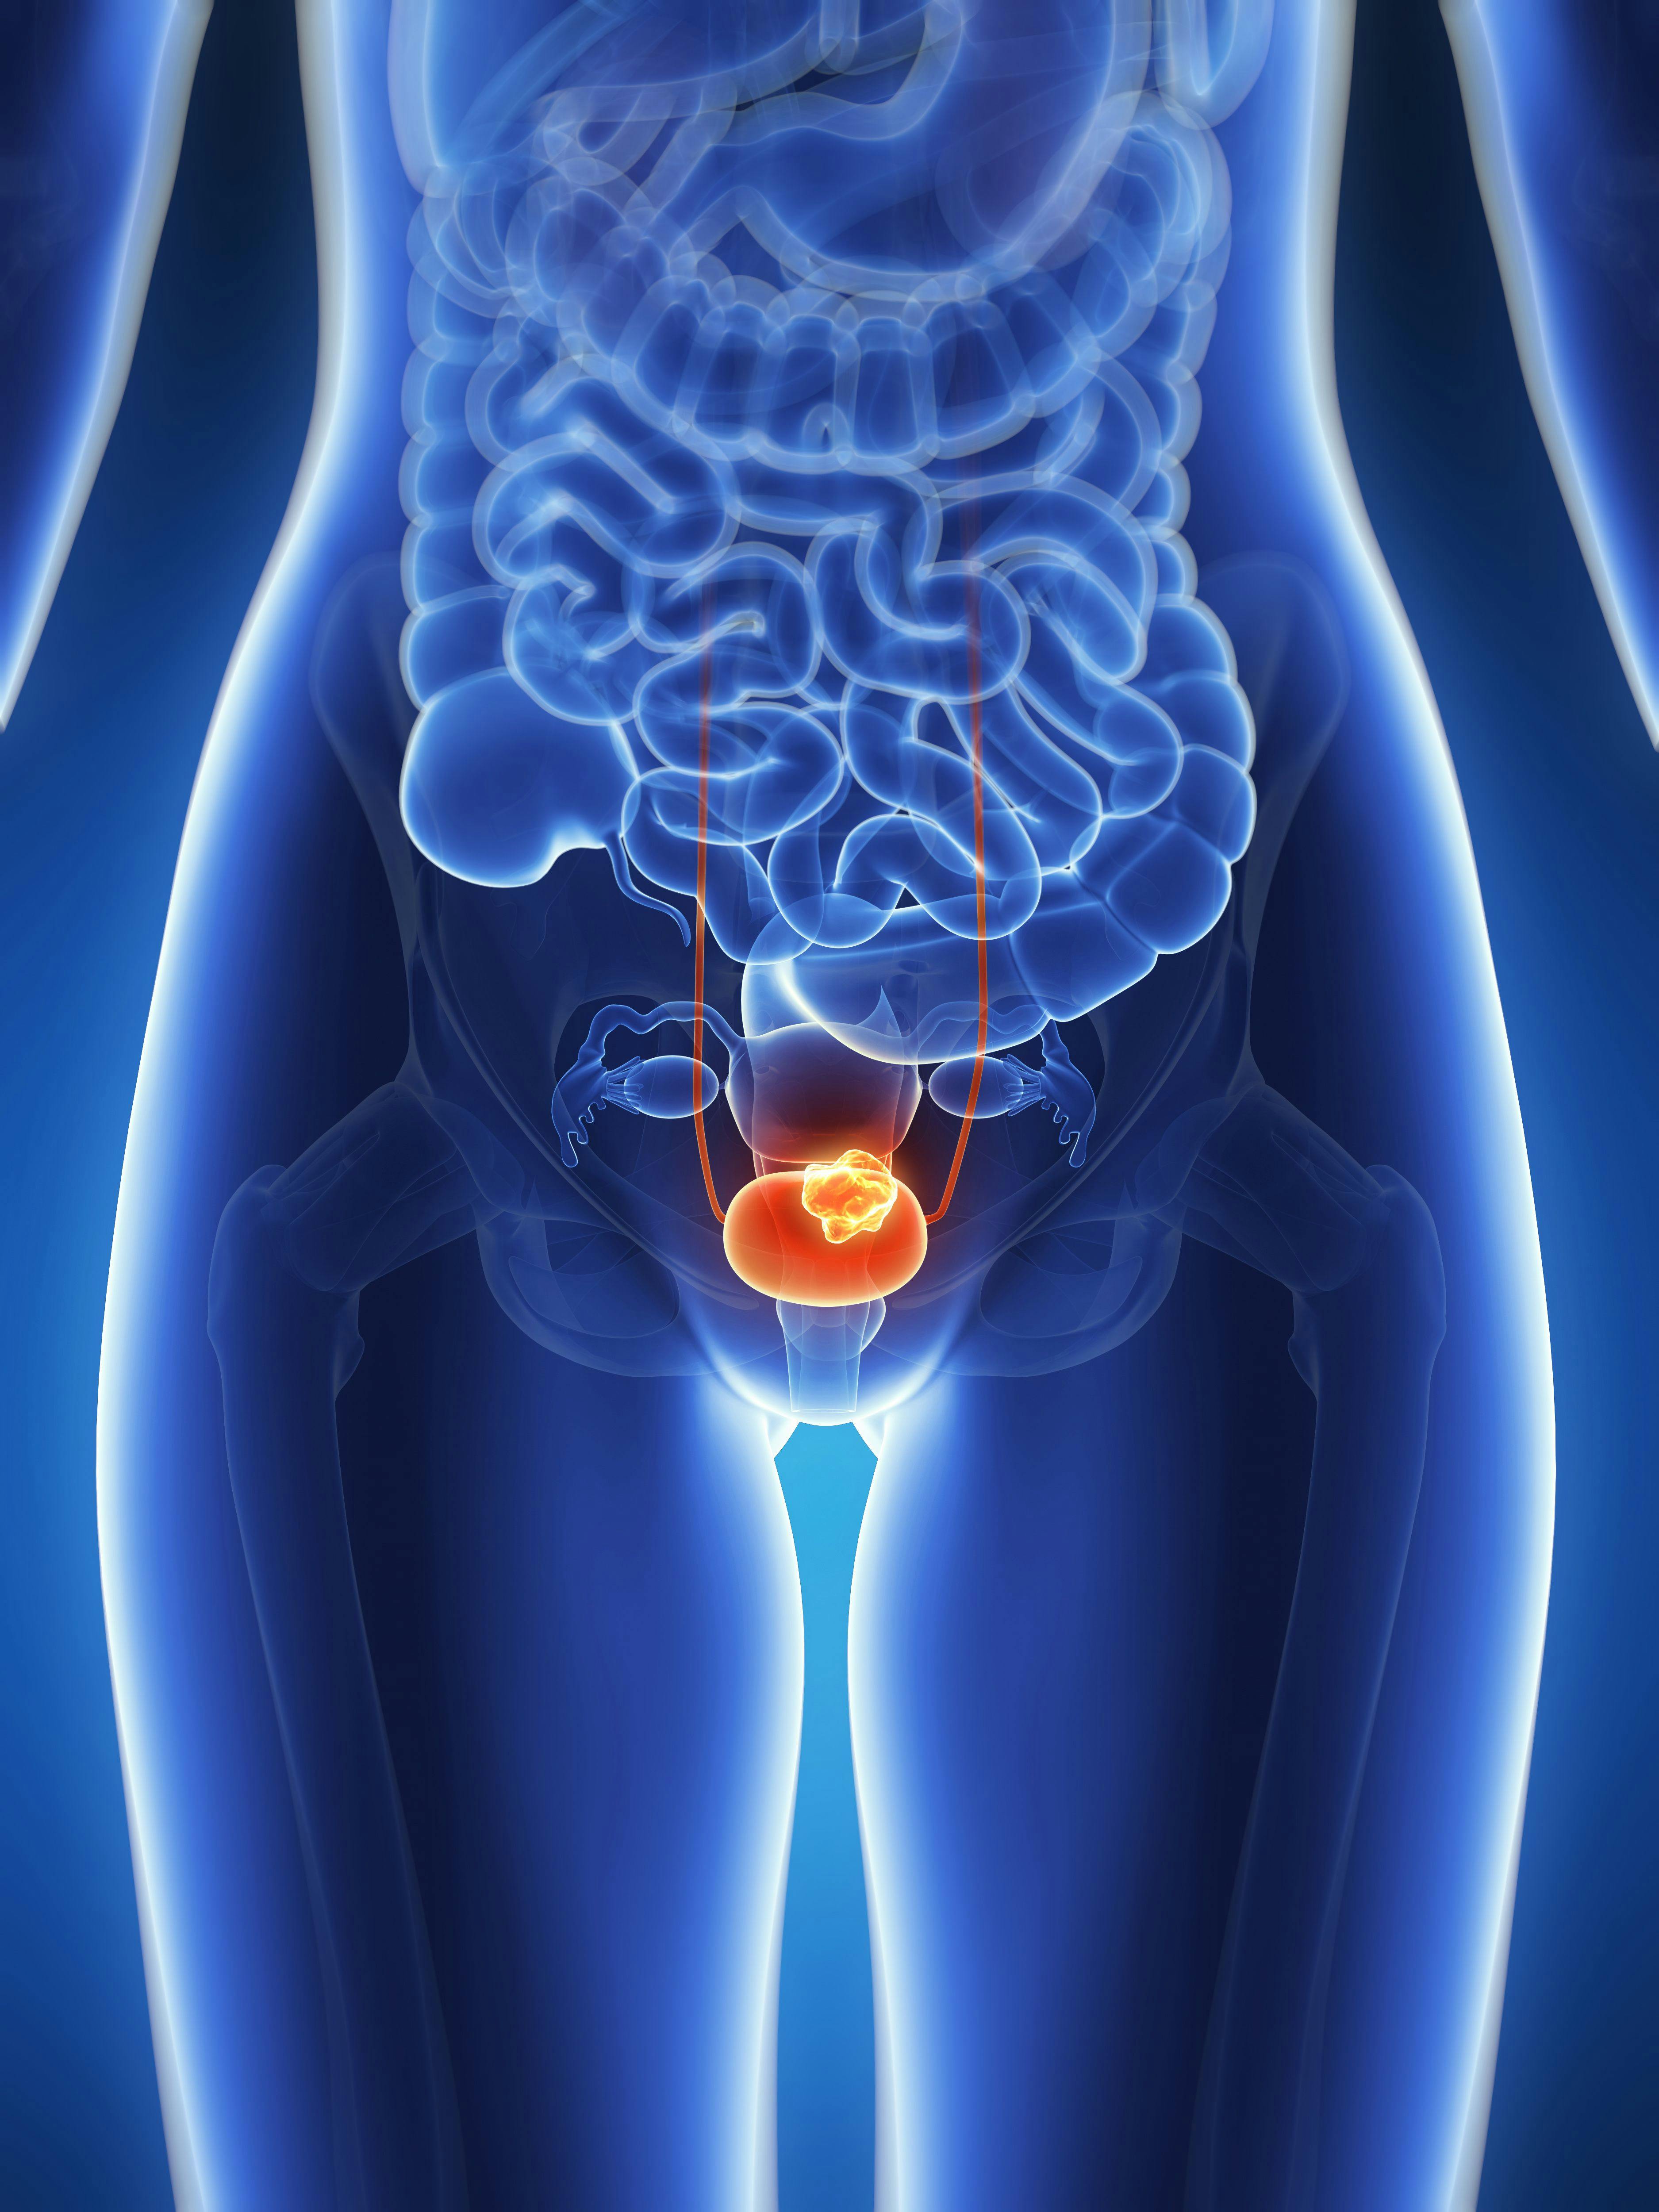 Patients with metastatic urothelial carcinoma did not derive further benefit from the addition of berzosertib to cisplatin and gemcitabine.